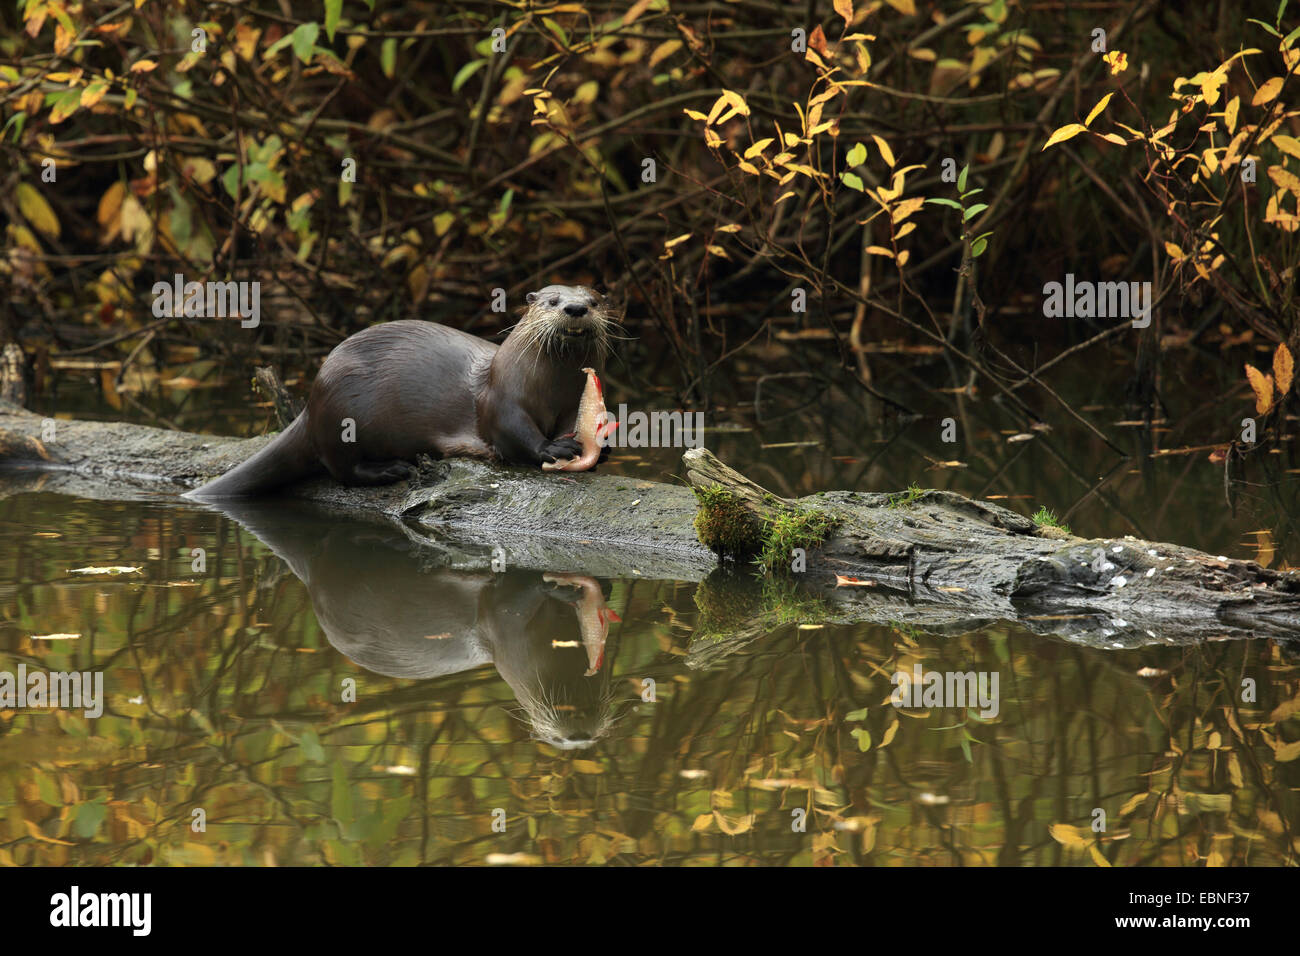 European river otter, European Otter, Eurasian Otter (Lutra lutra), eating fish on a tree trunk lying in the water, Germany, Saxony Stock Photo